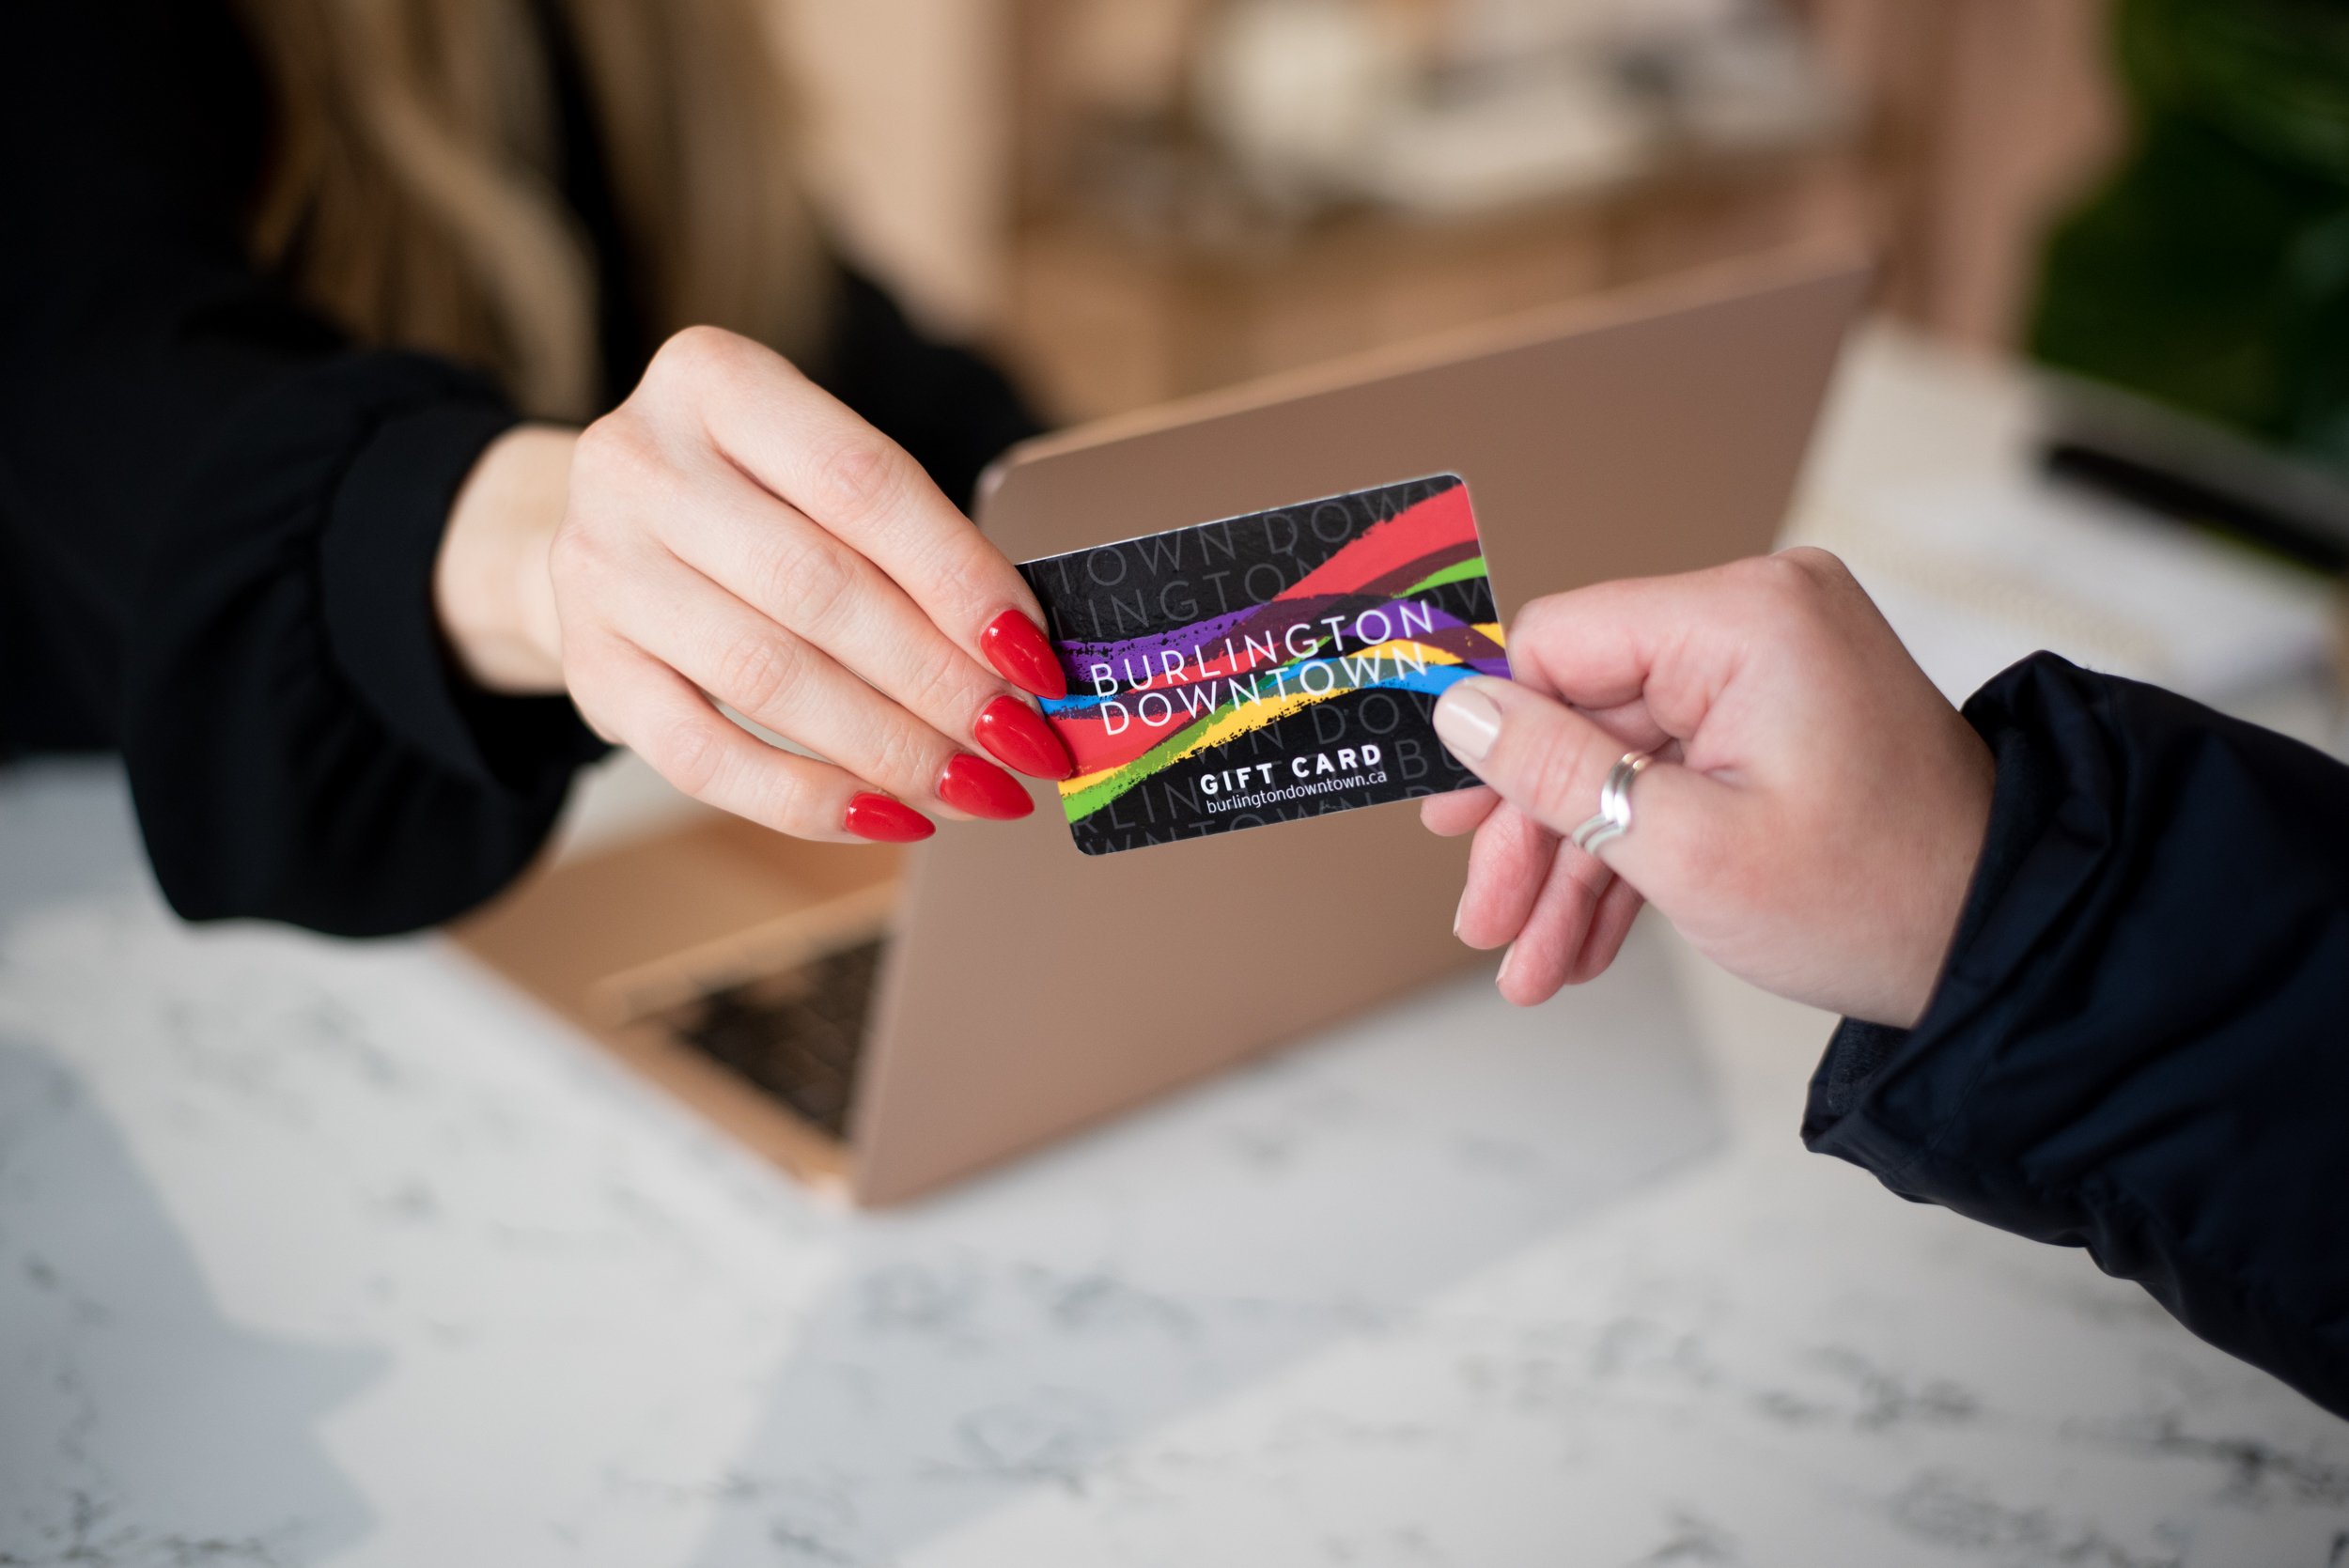  Commercial image of hands paying with a gift card. 